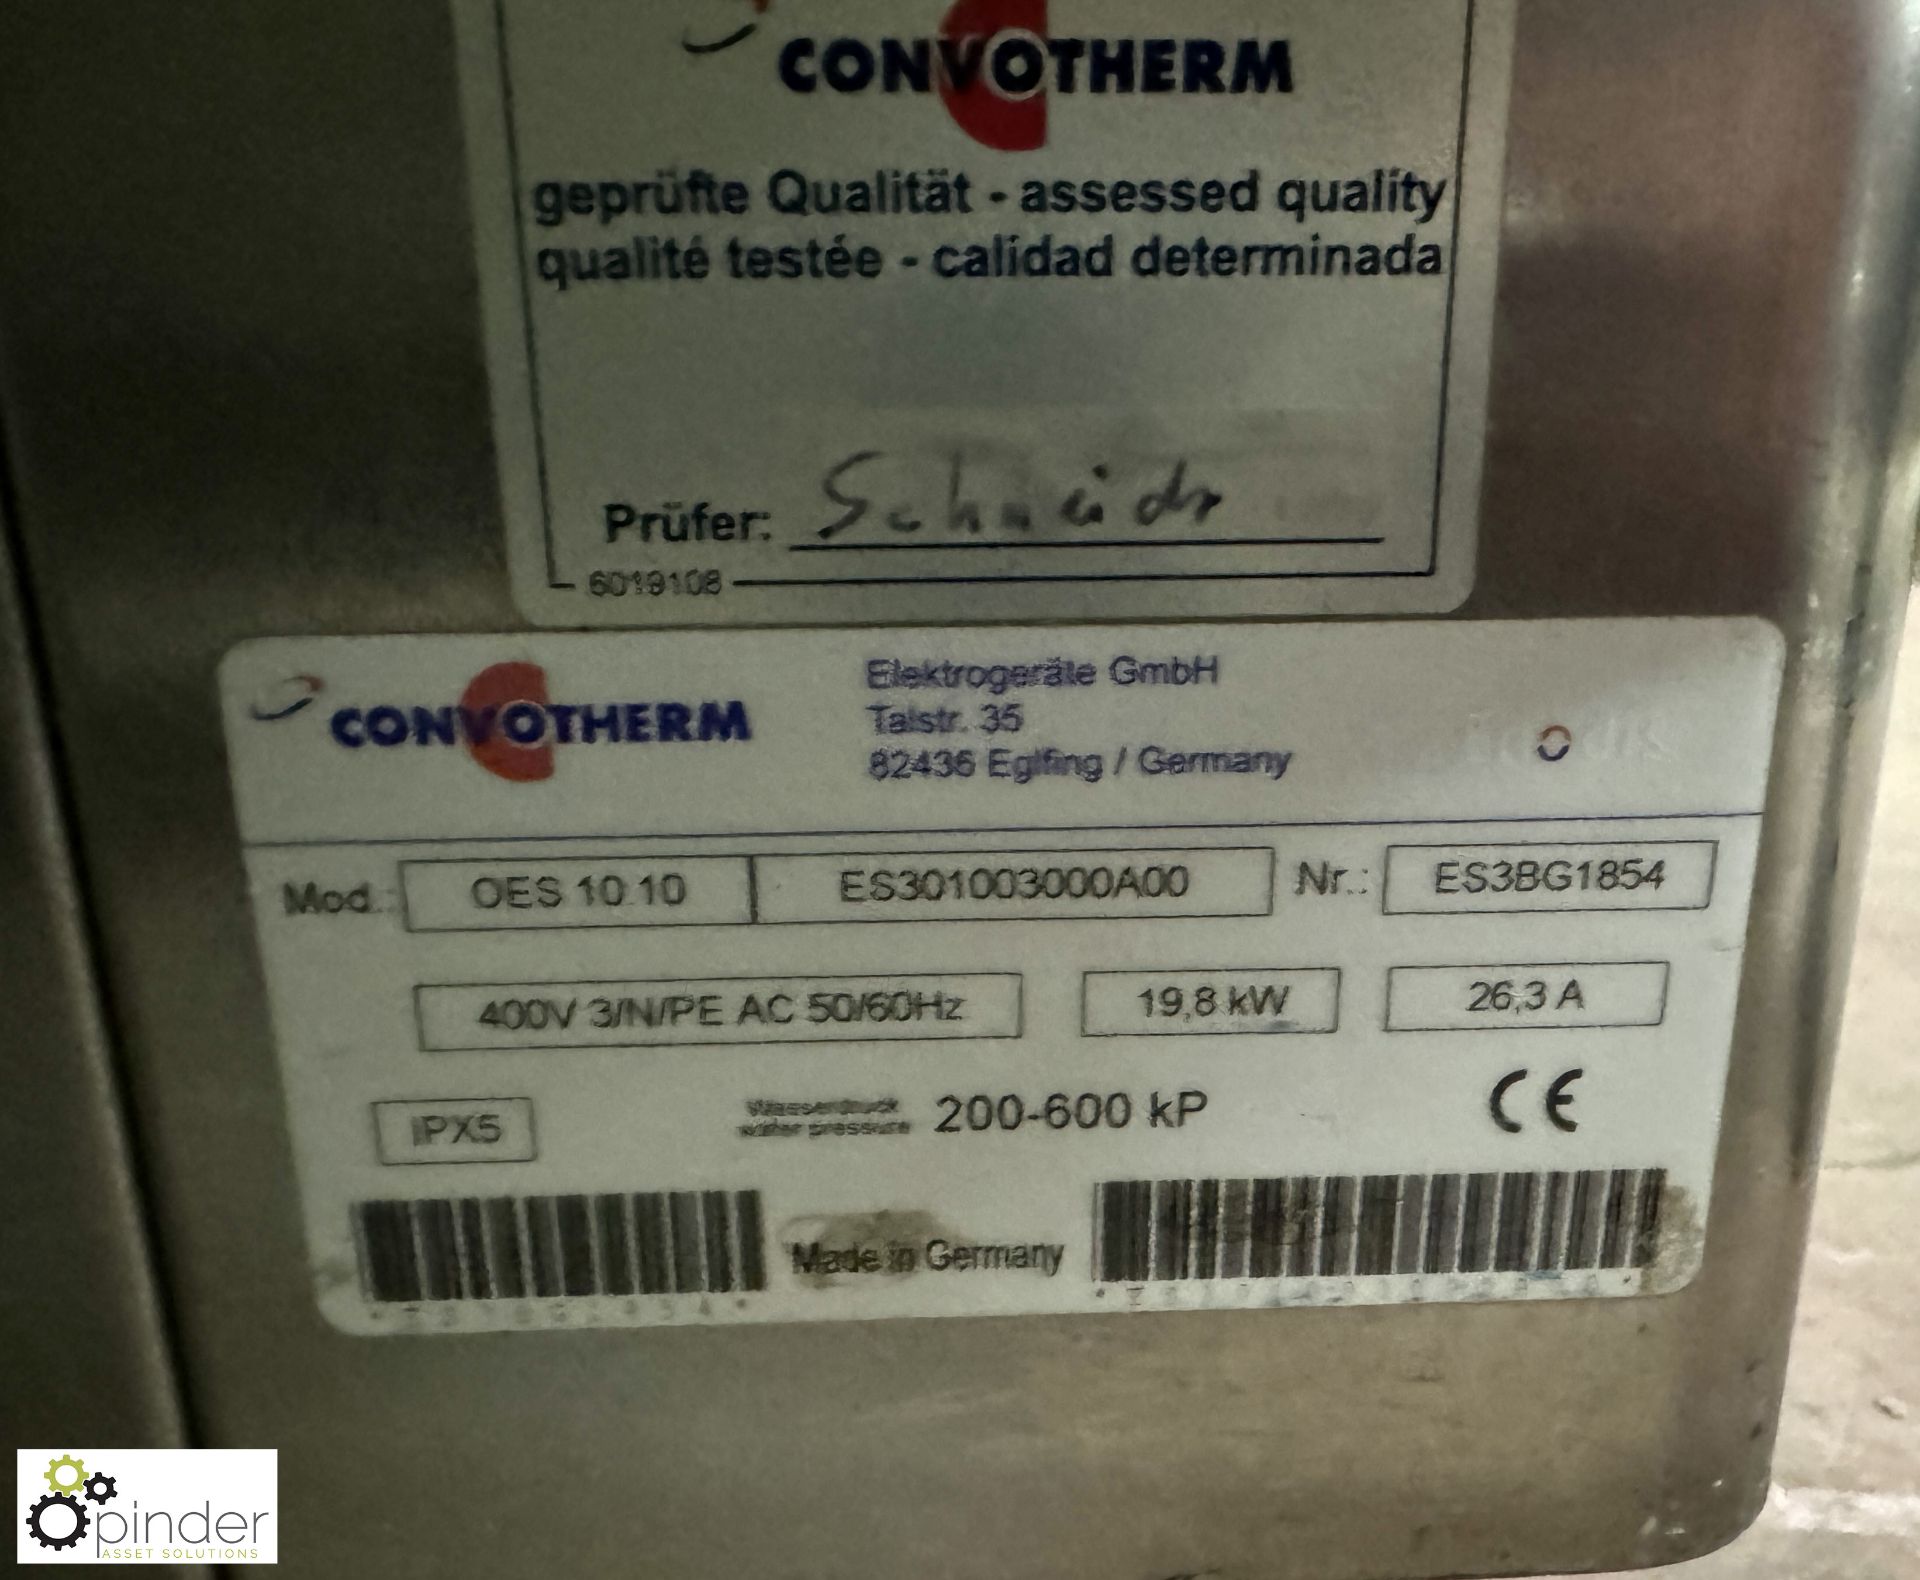 Convotherm OES 1010 Combi Oven, 940mm x 810mm x 1100mm, 415volts, no control panel front, with - Image 5 of 7